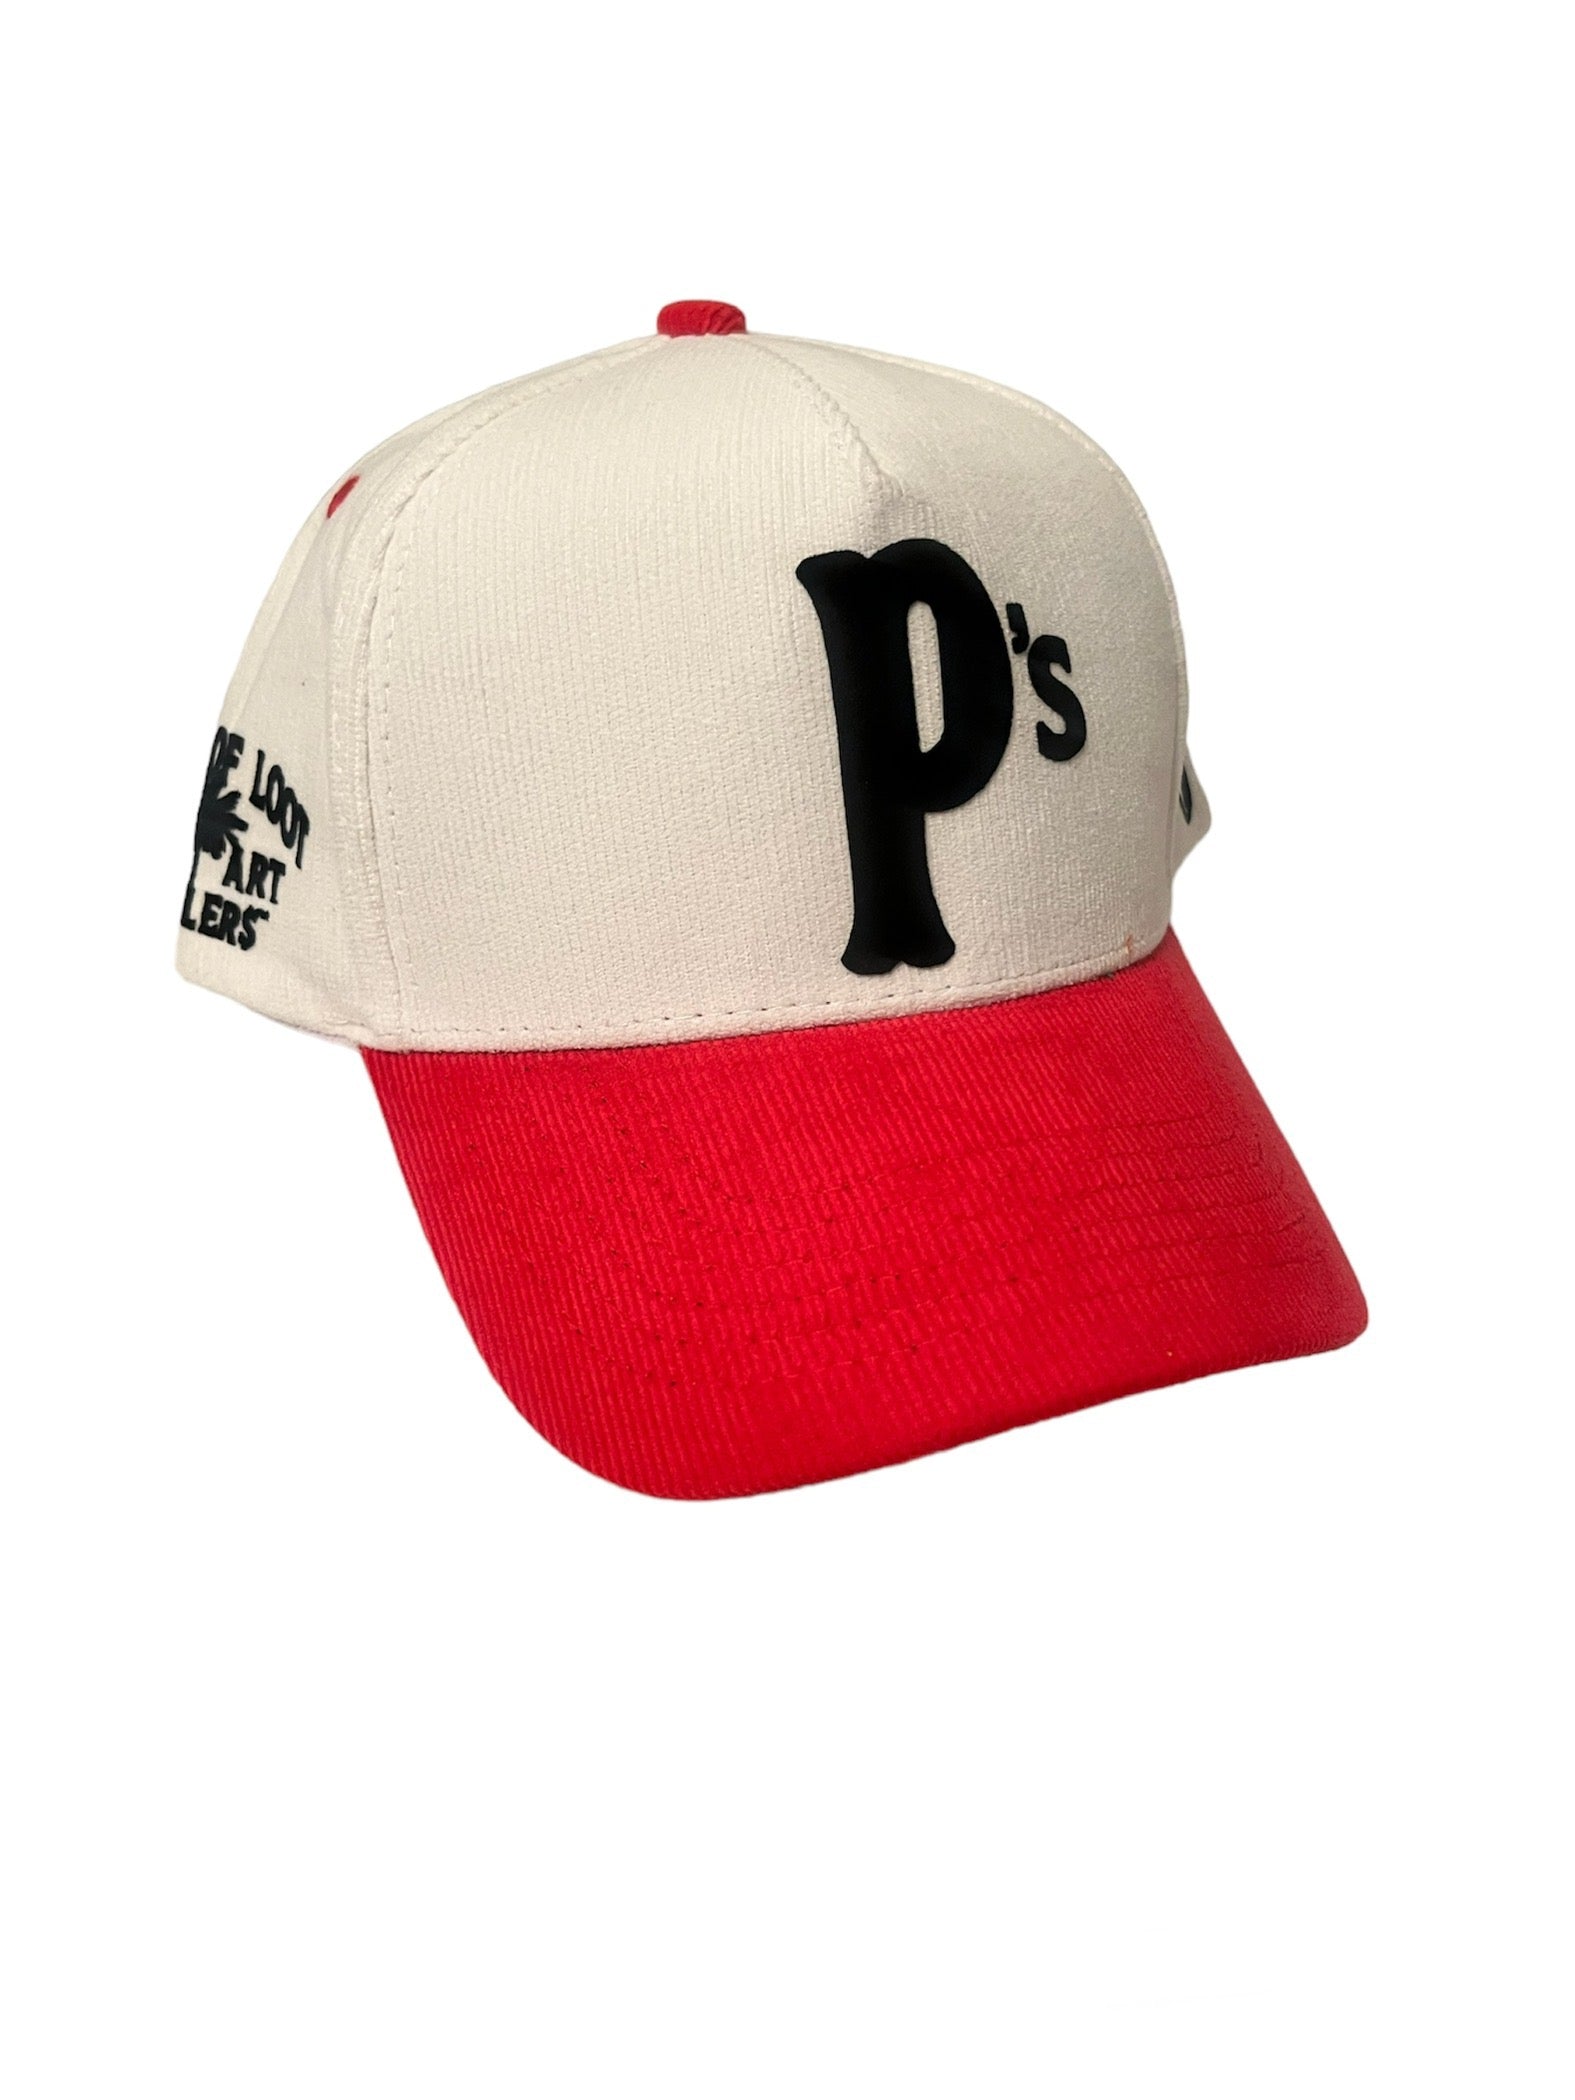 The P's Snapback – Pieces of Loot